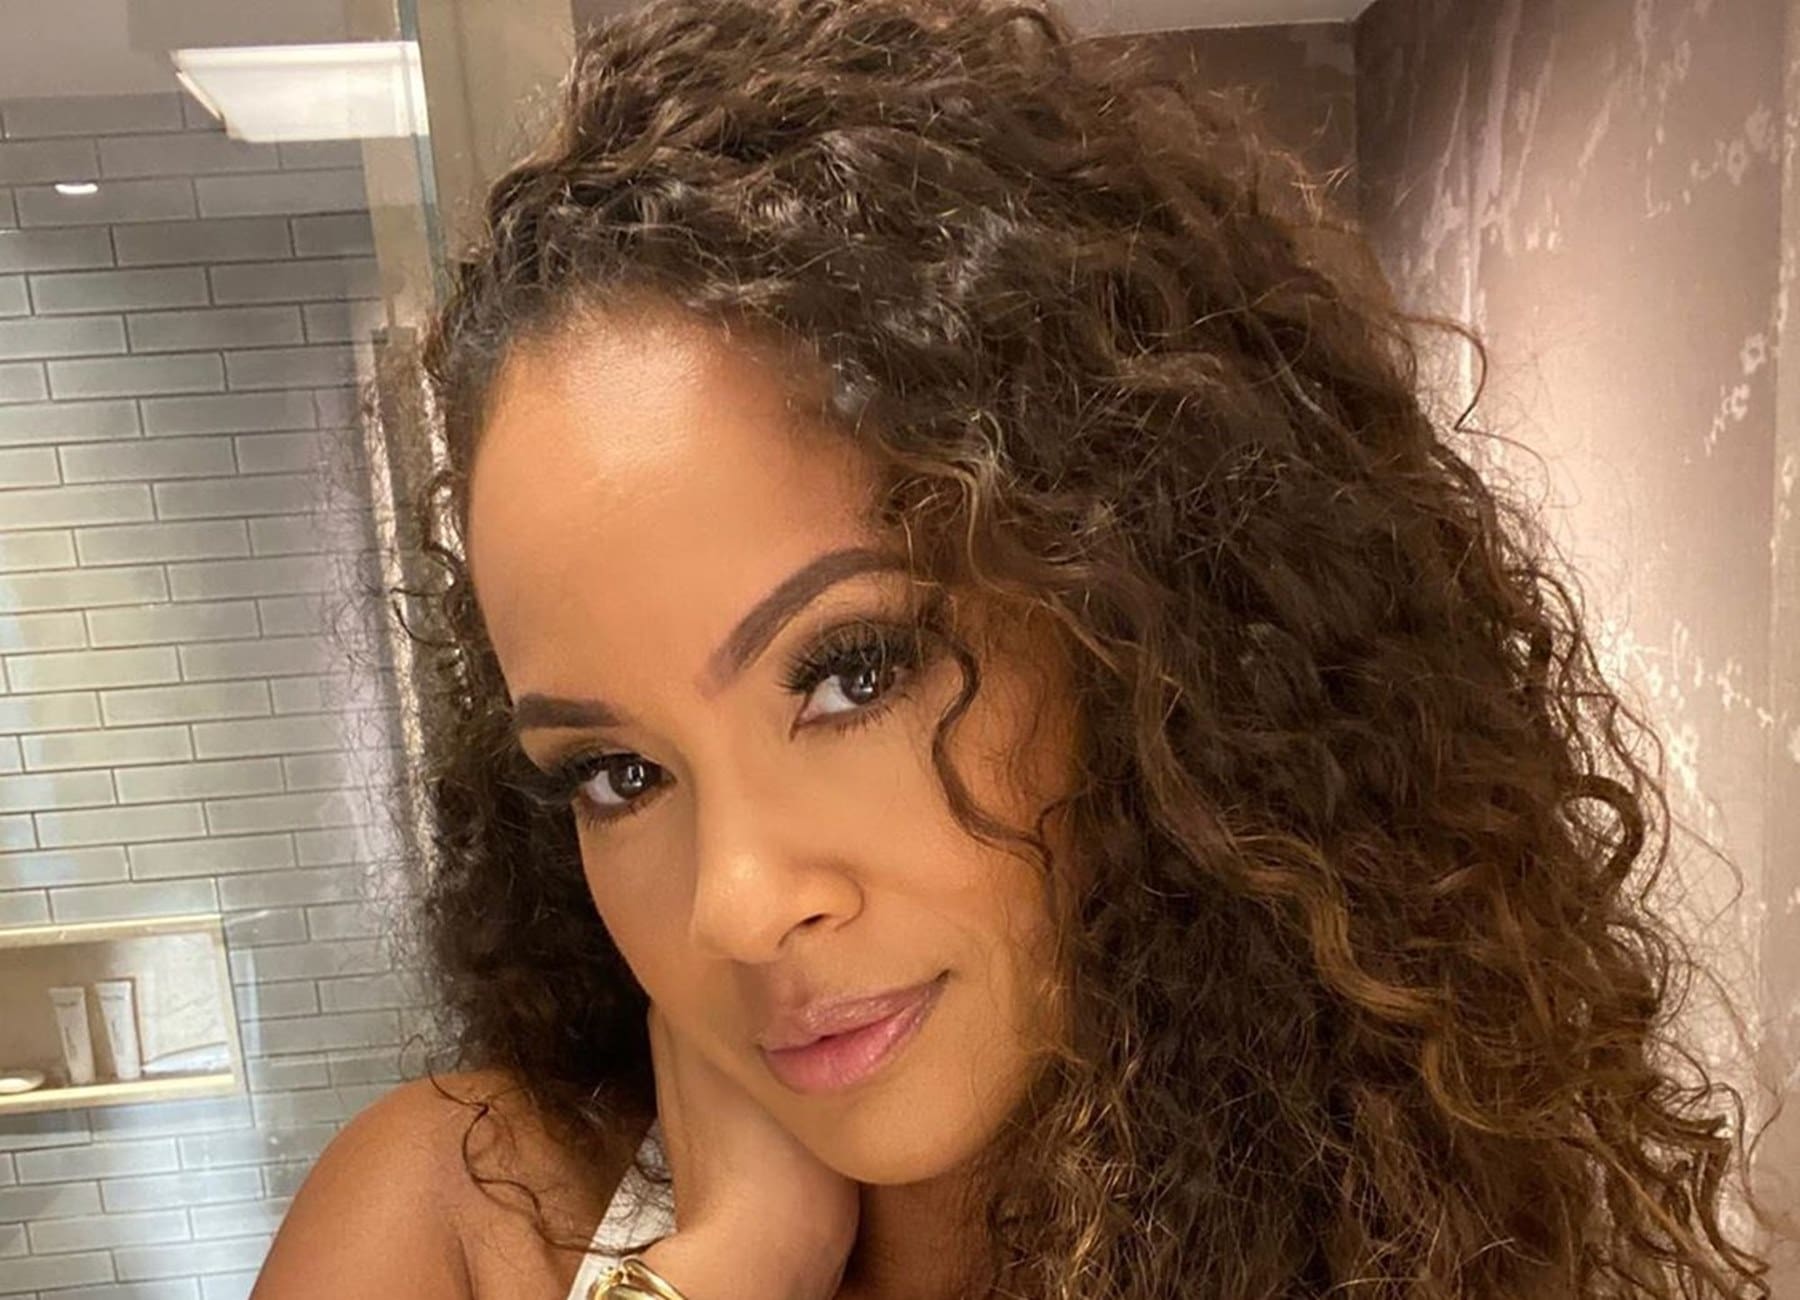 Evelyn Lozada Shares Scandalous Bathing Suit Photos That Have Young Men Trying To Stray Her From Her Religious Path Celebrity Insider pic photo